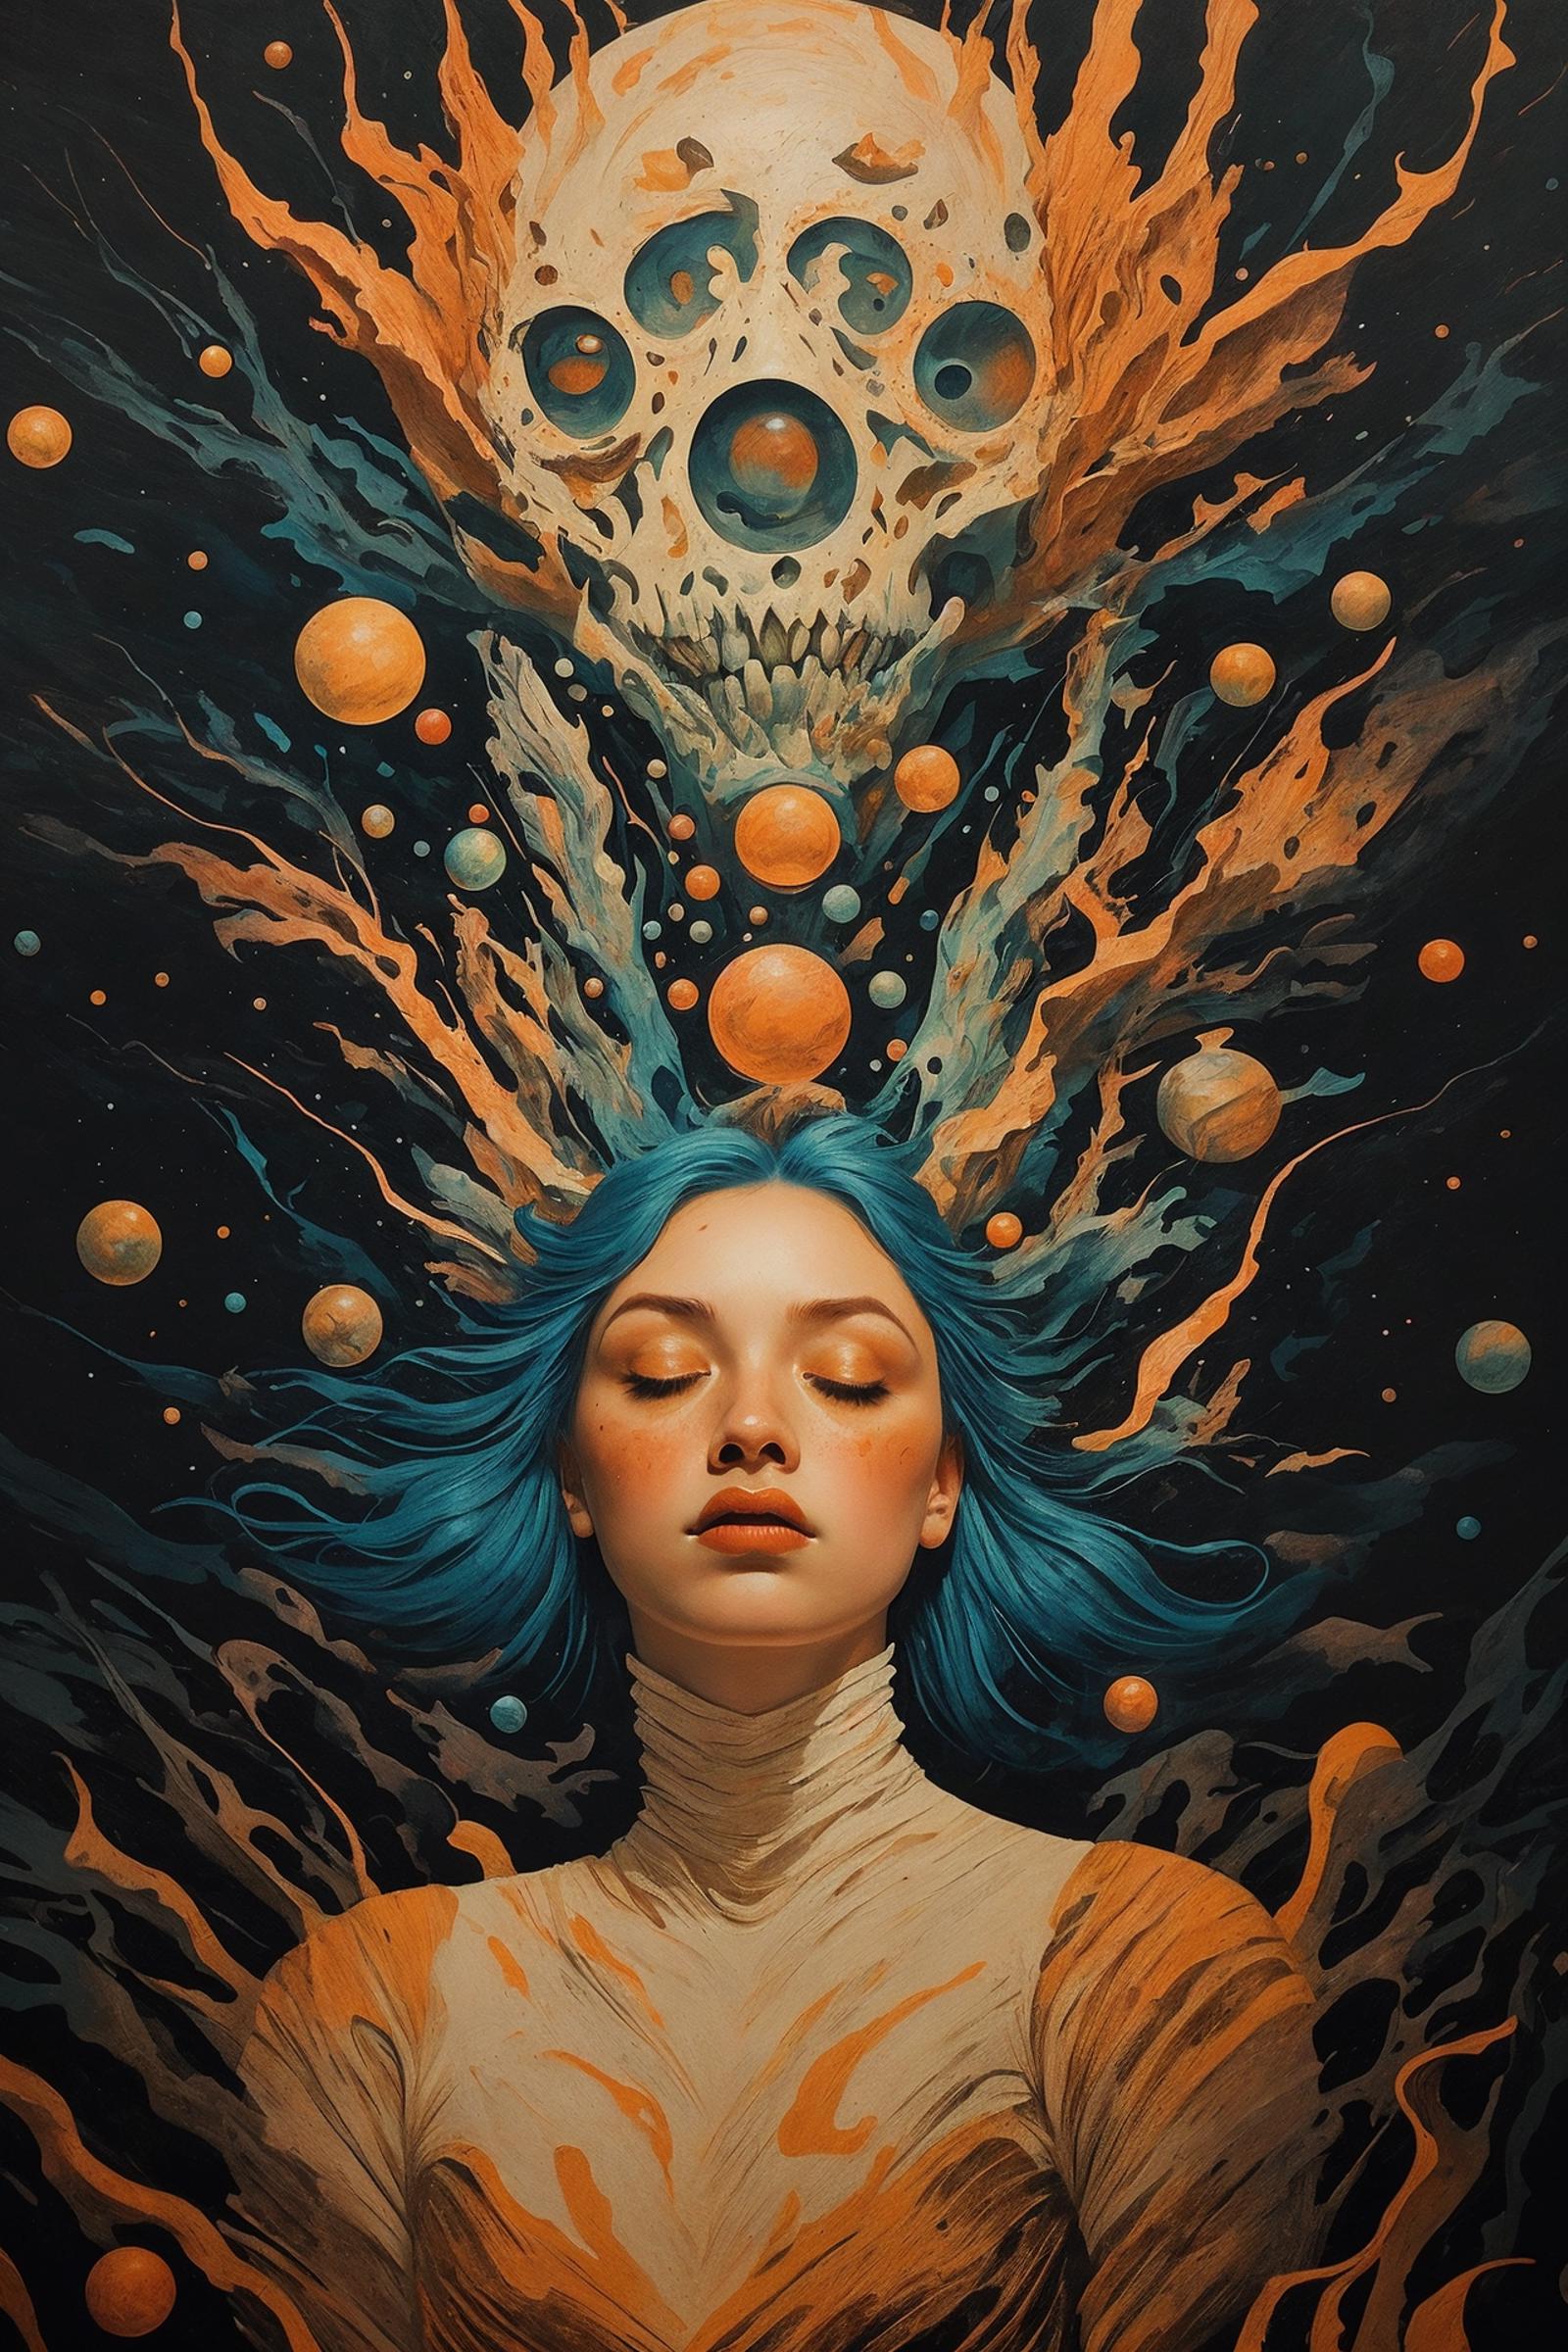 A painting of a woman with blue hair, surrounded by orange spheres and an orange background.